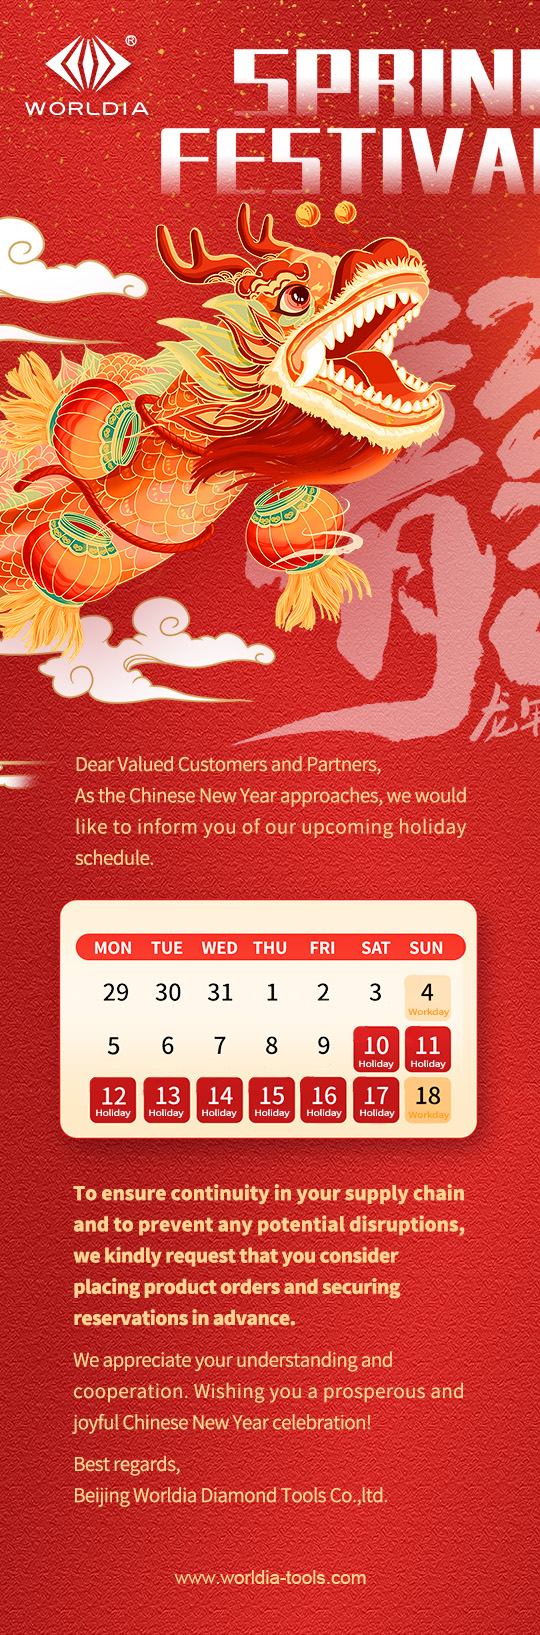 Secure Your Supplies with Early Orders for Chinese New Year Holiday!